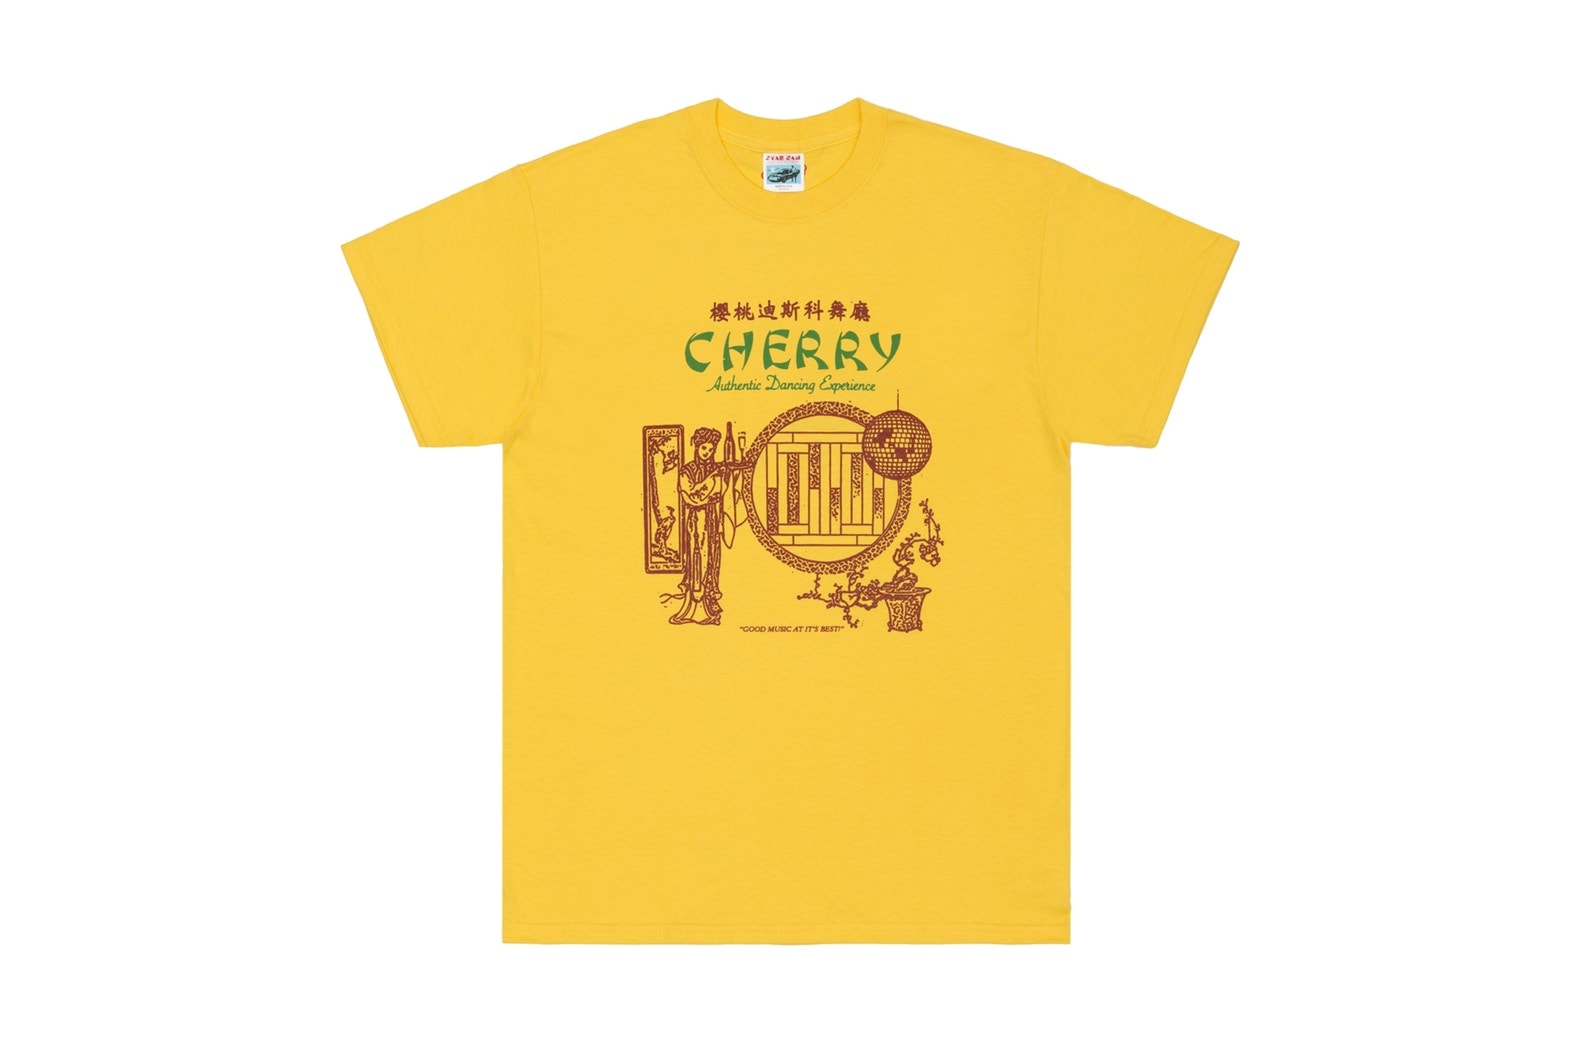 Cherry Discotheque Dover Street Market T-shirt collection